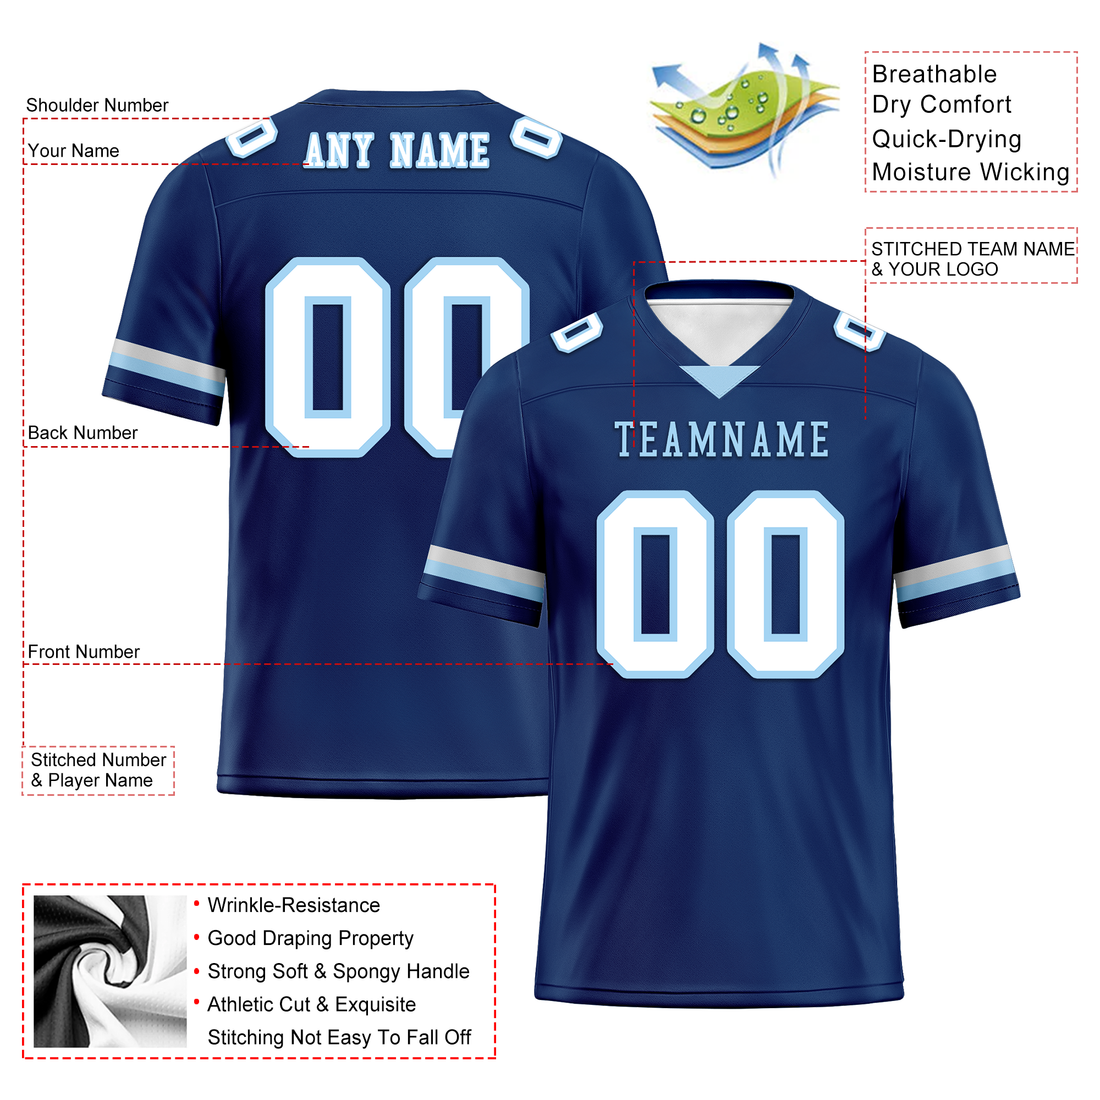 Custom Blue Classic Style Personalized Authentic Football Jersey FBJ02-bd0a70a7